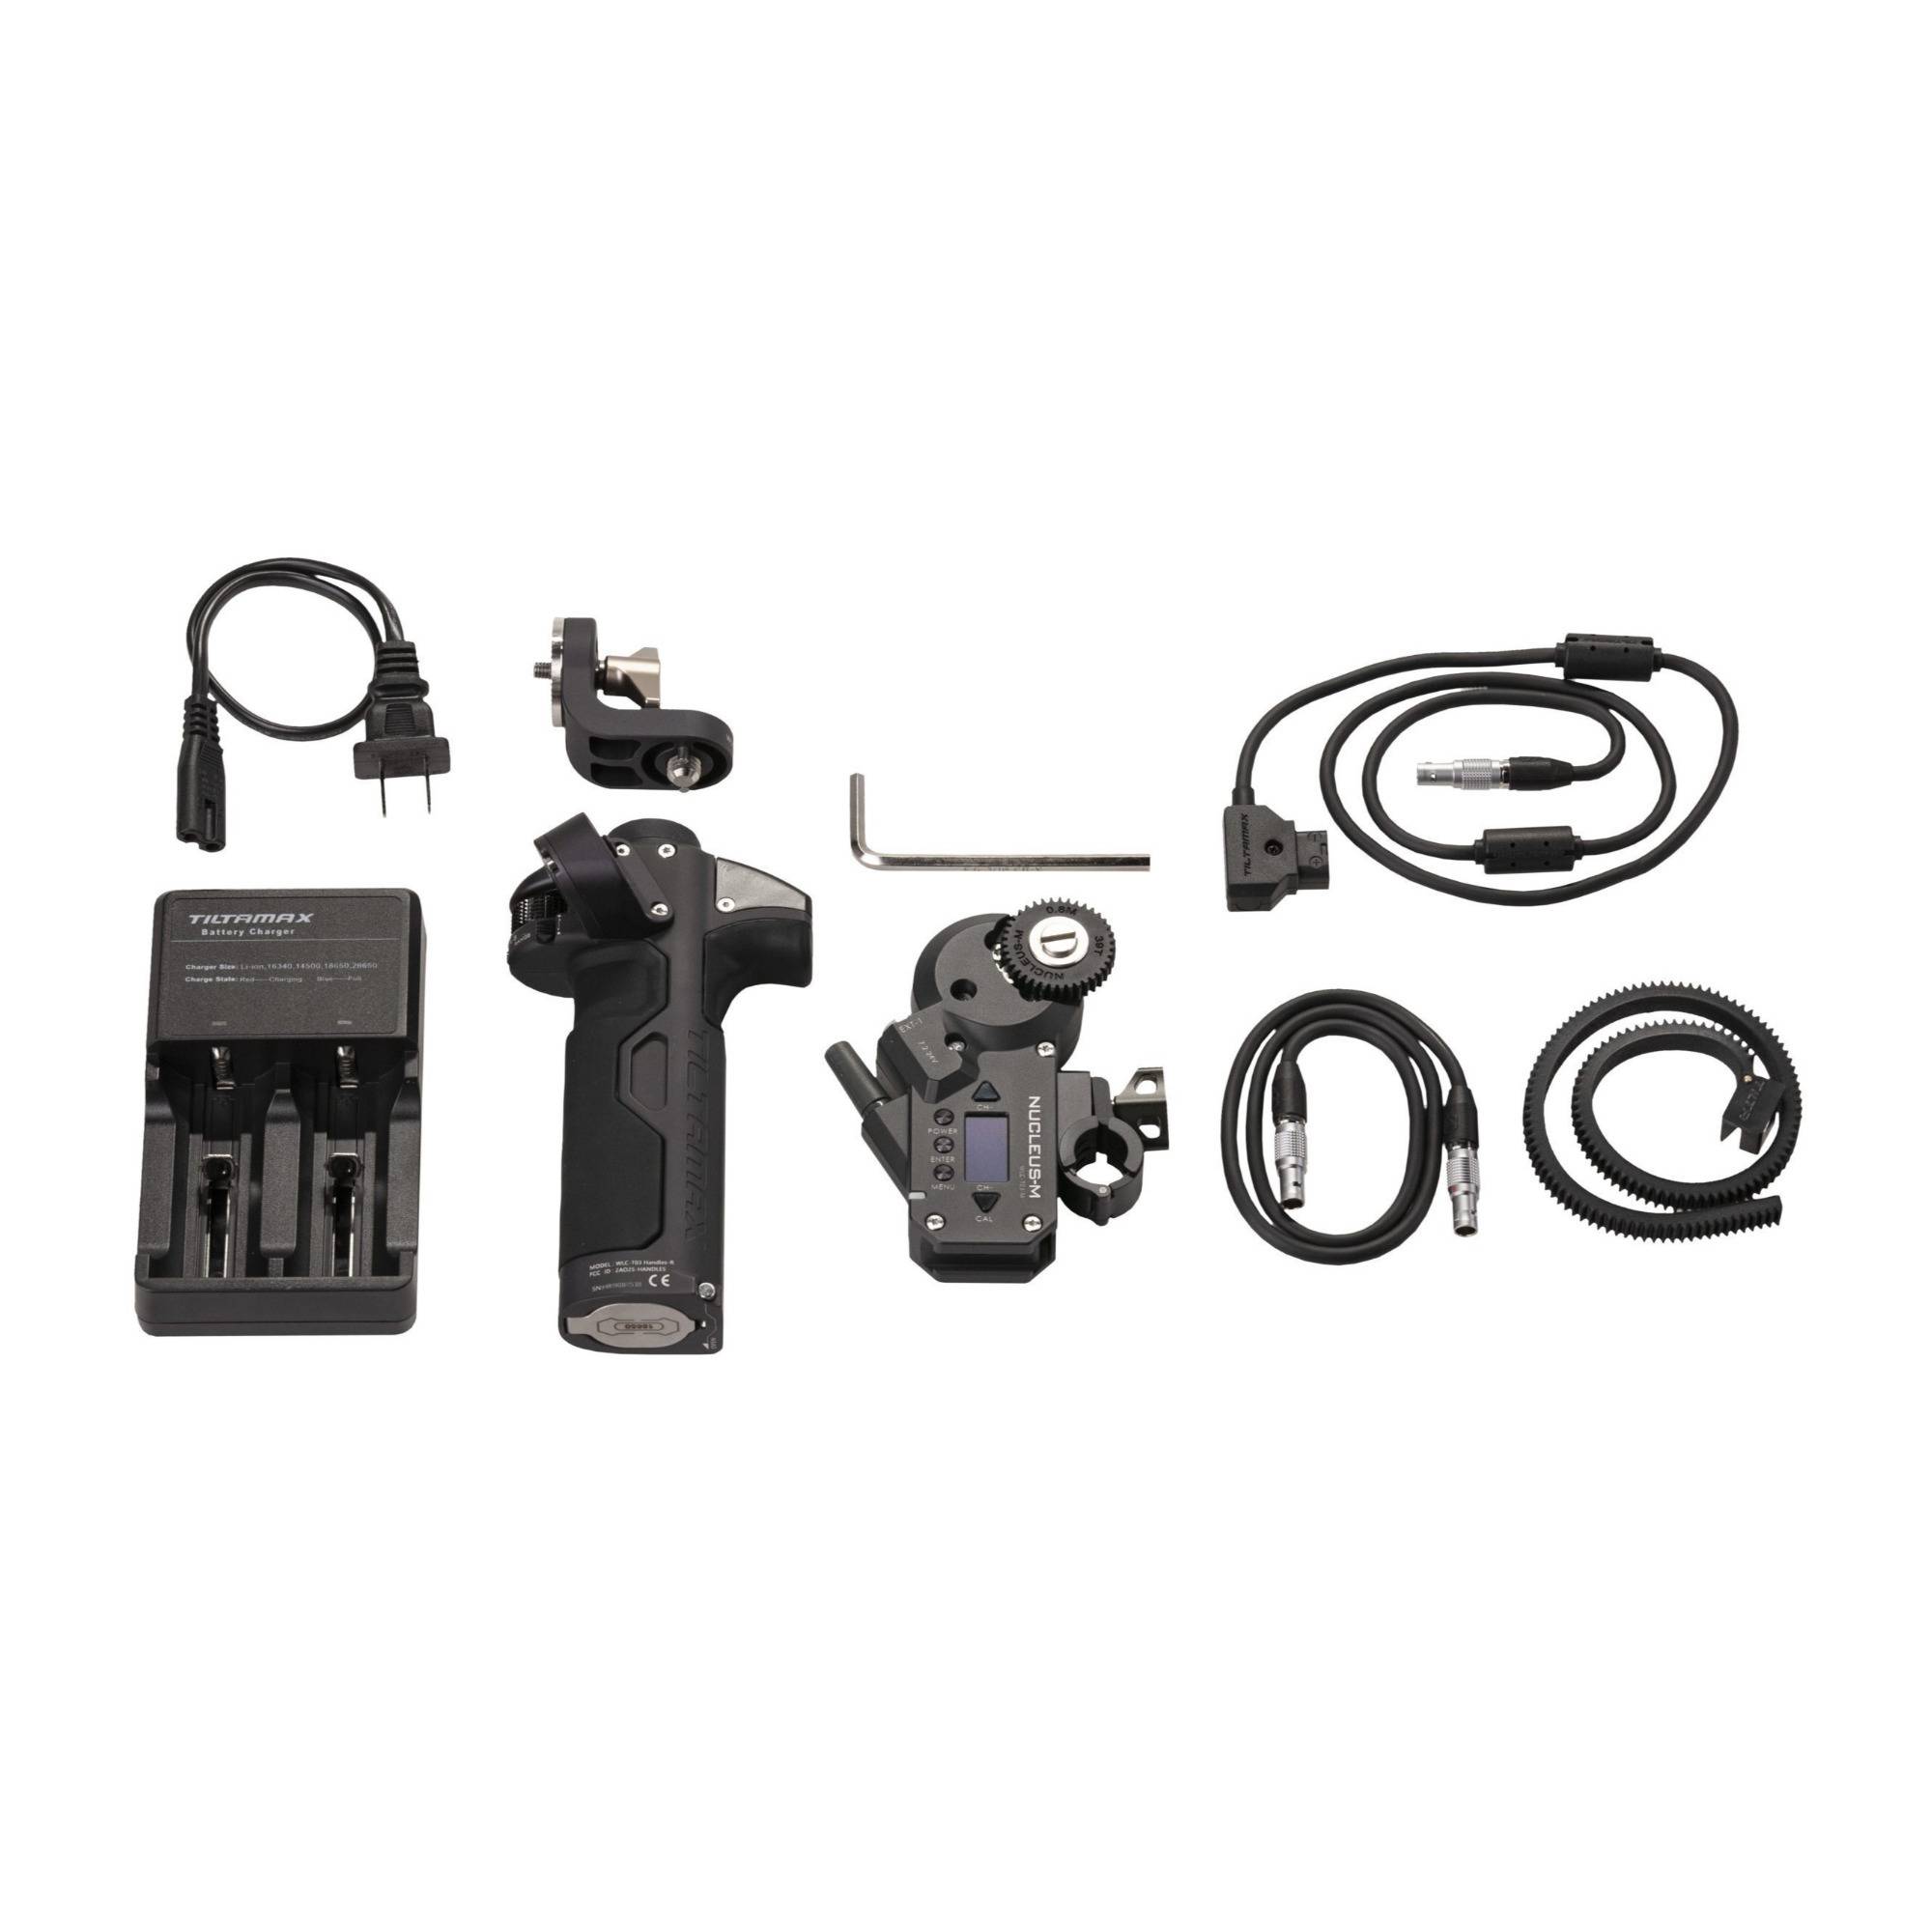 Nucleus-M Wireless Lens Control System Partial Kit II